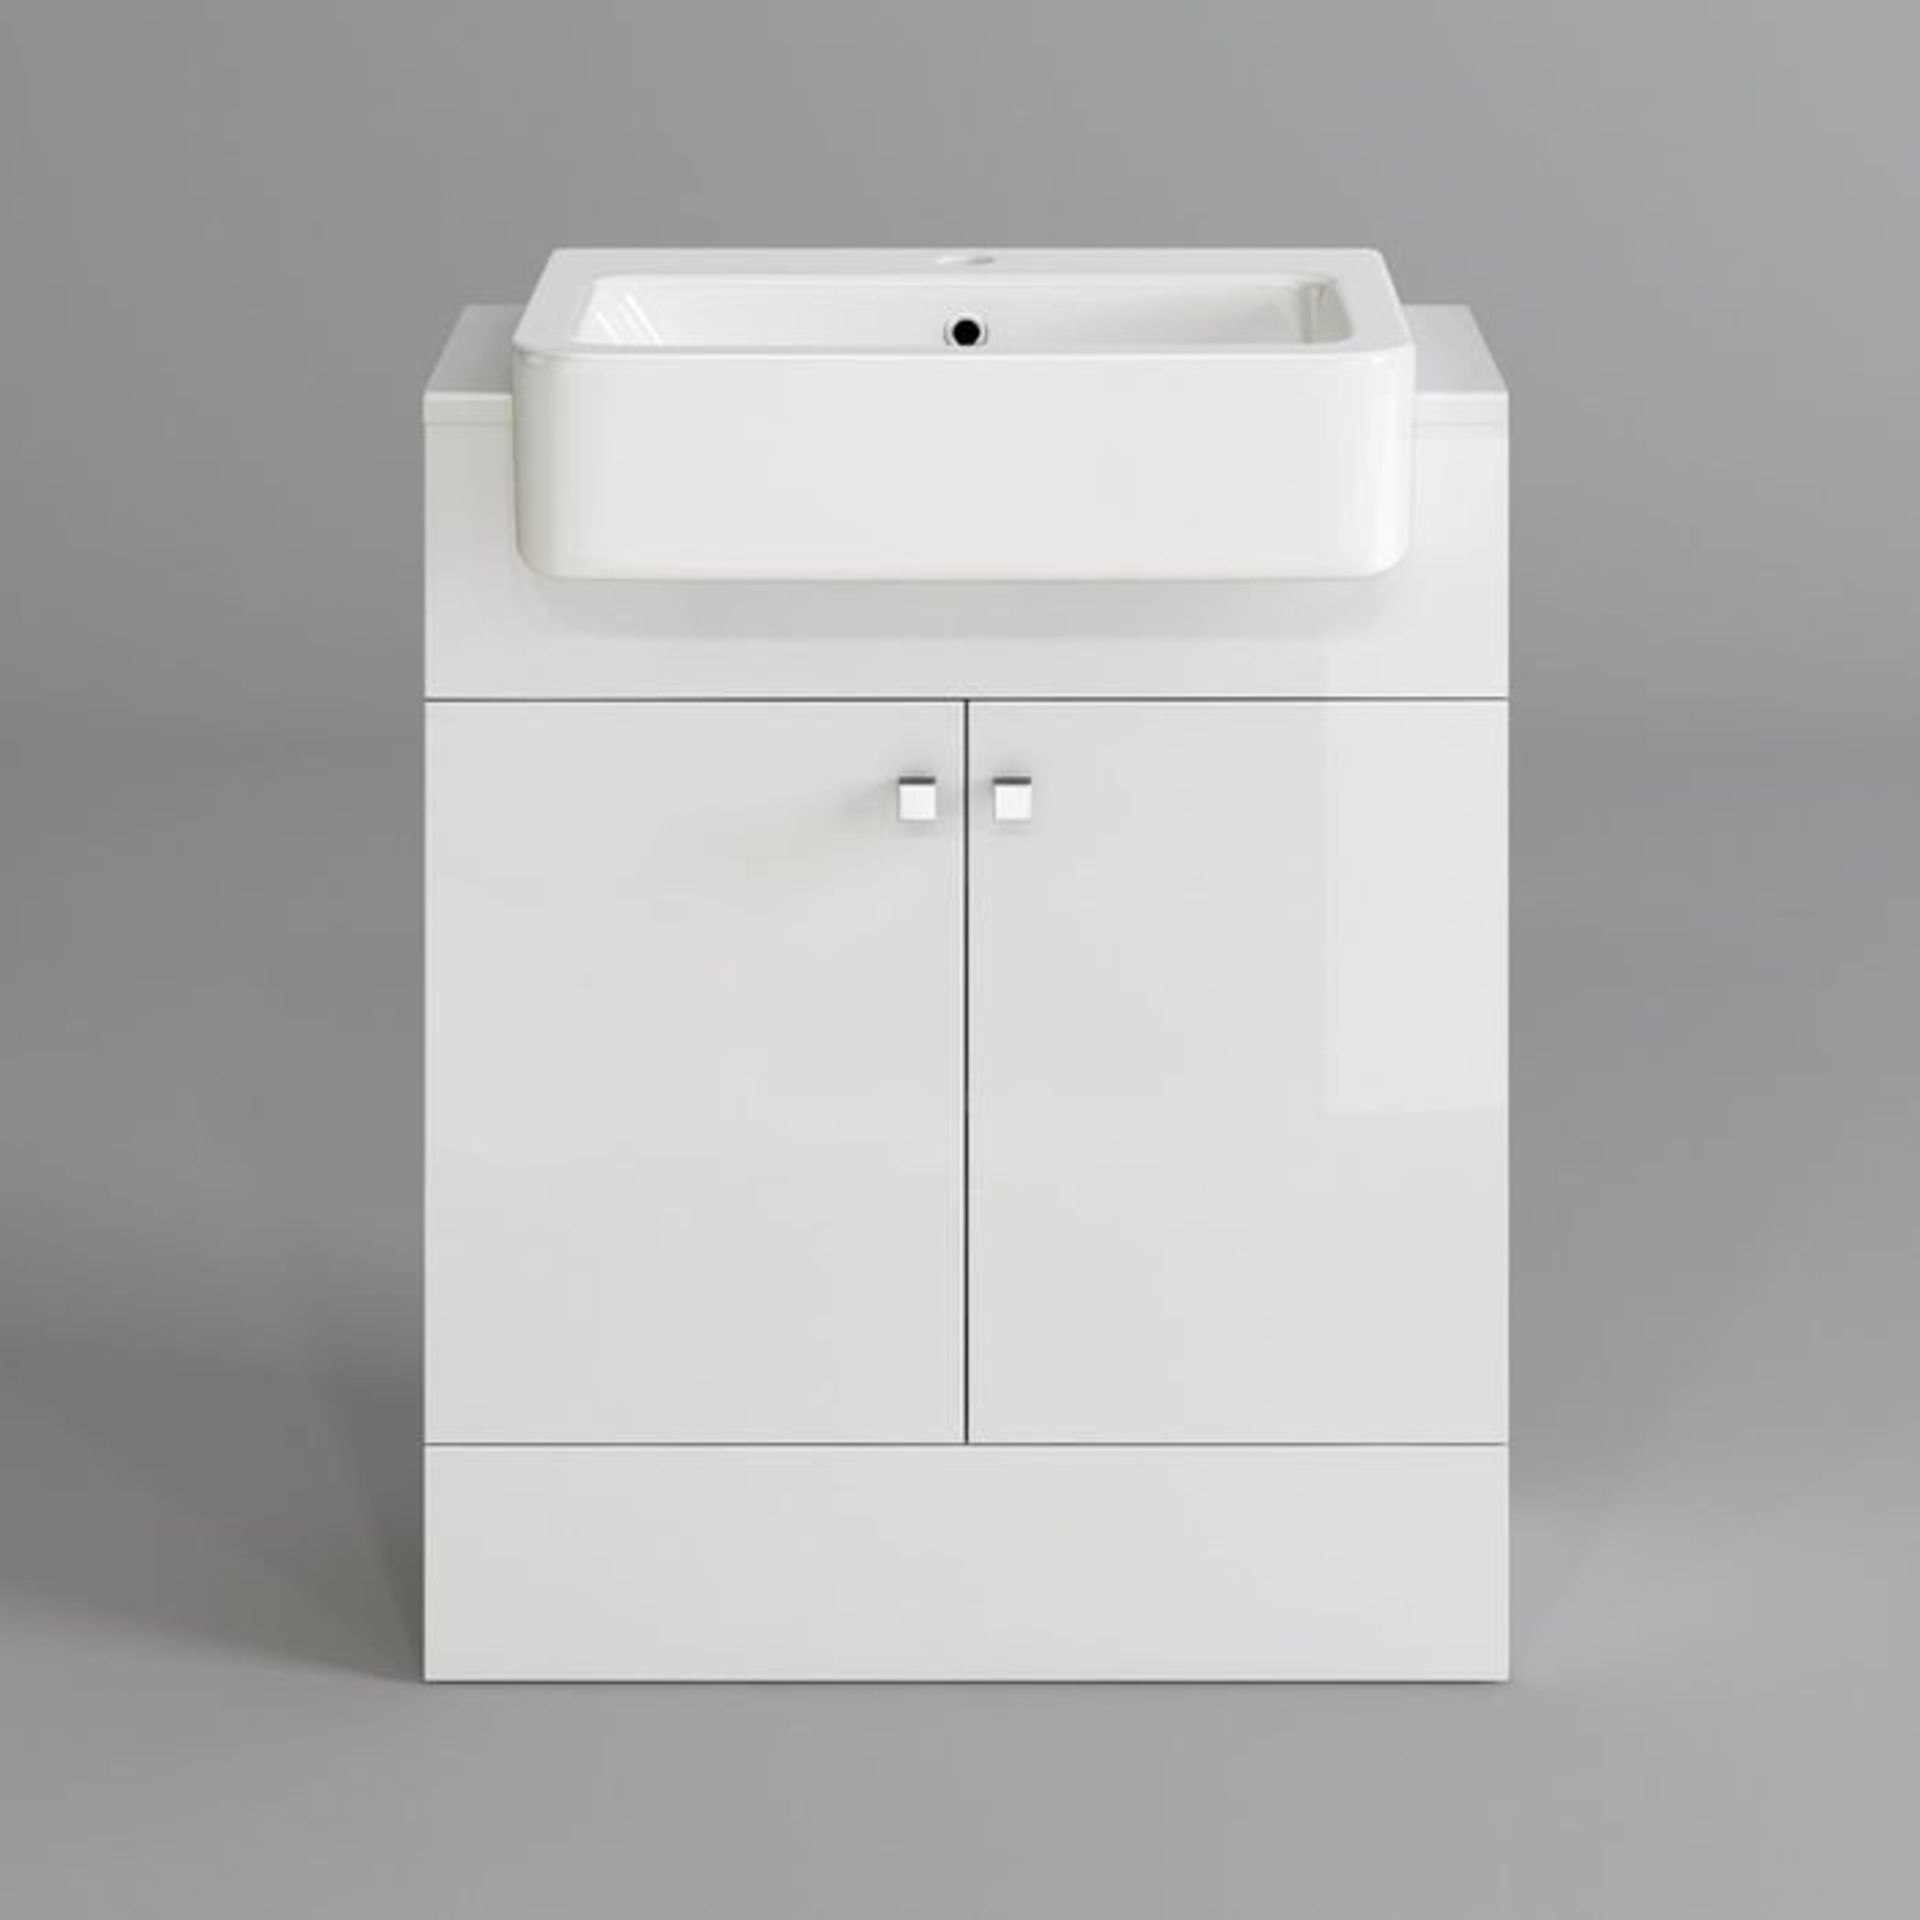 (H20) 660mm Harper Gloss White Basin Vanity Unit - Floor Standing RRP £449.99. COMES COMPLETE WITH - Image 5 of 5